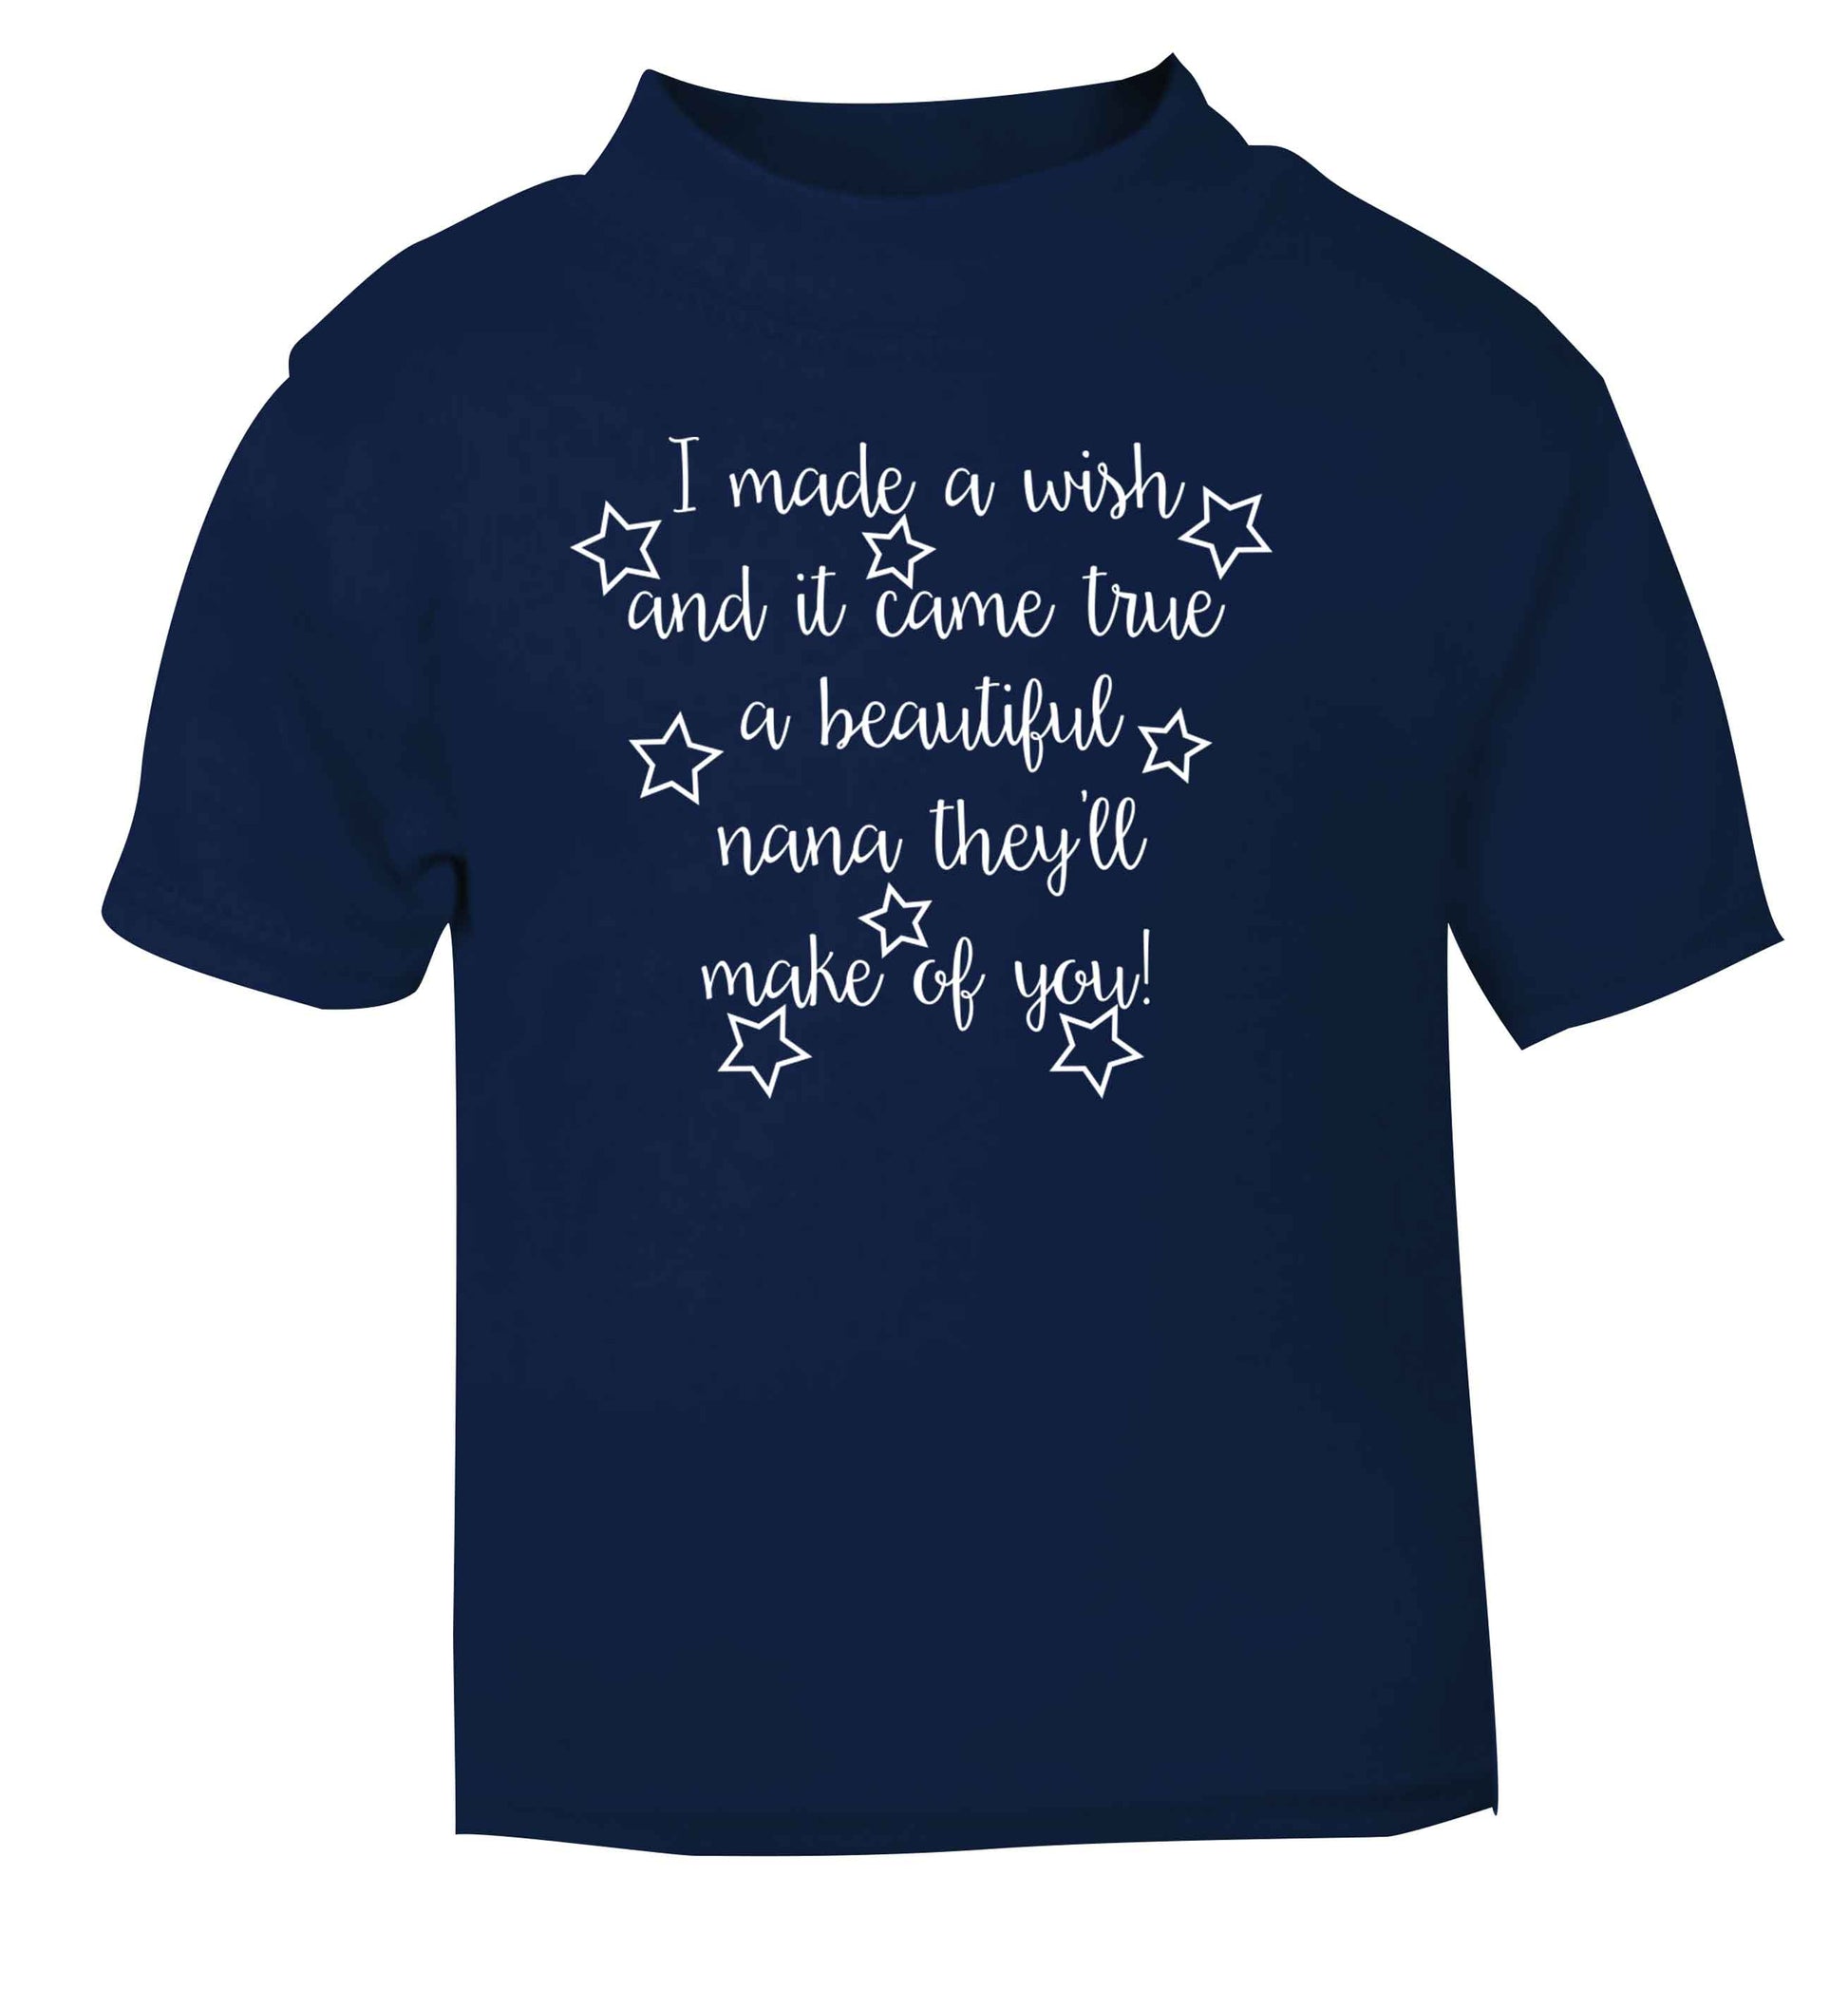 I made a wish and it came true a beautiful nana they'll make of you! navy Baby Toddler Tshirt 2 Years